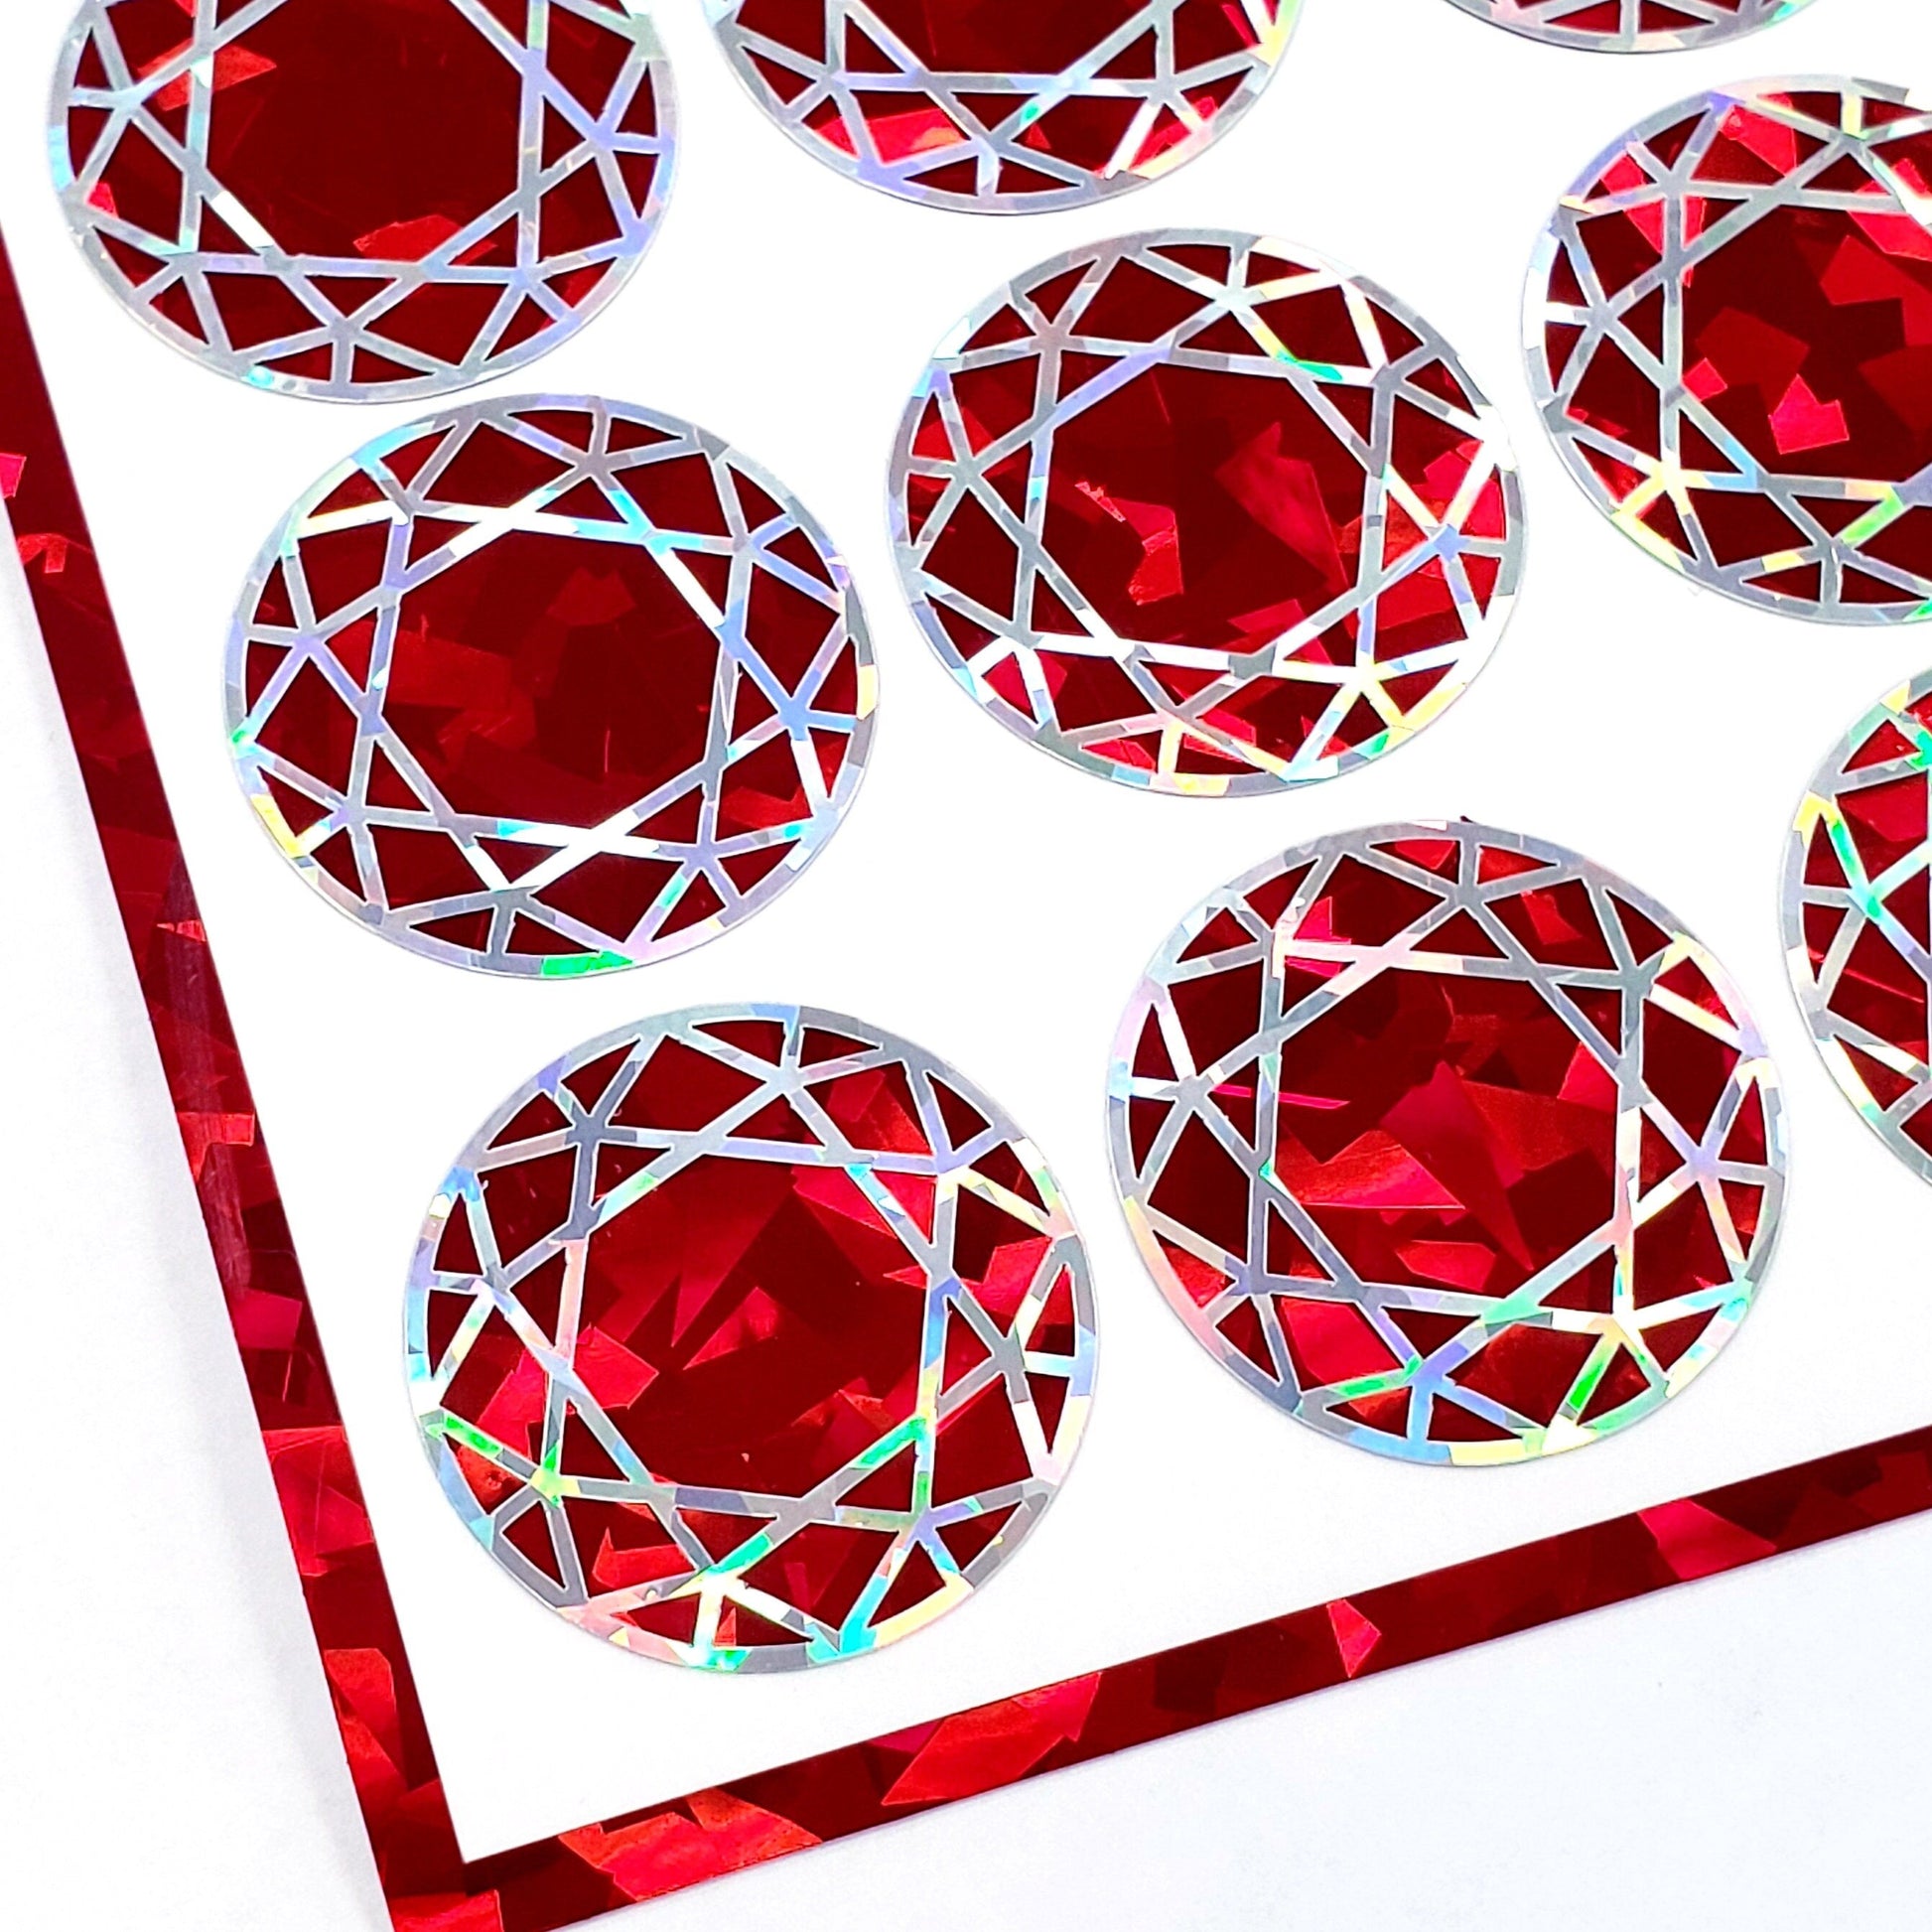 July Birthstone stickers, set of 20 small sparkly round red ruby gemstone decals for gifts, notecards, journals and scrapbook embellishments